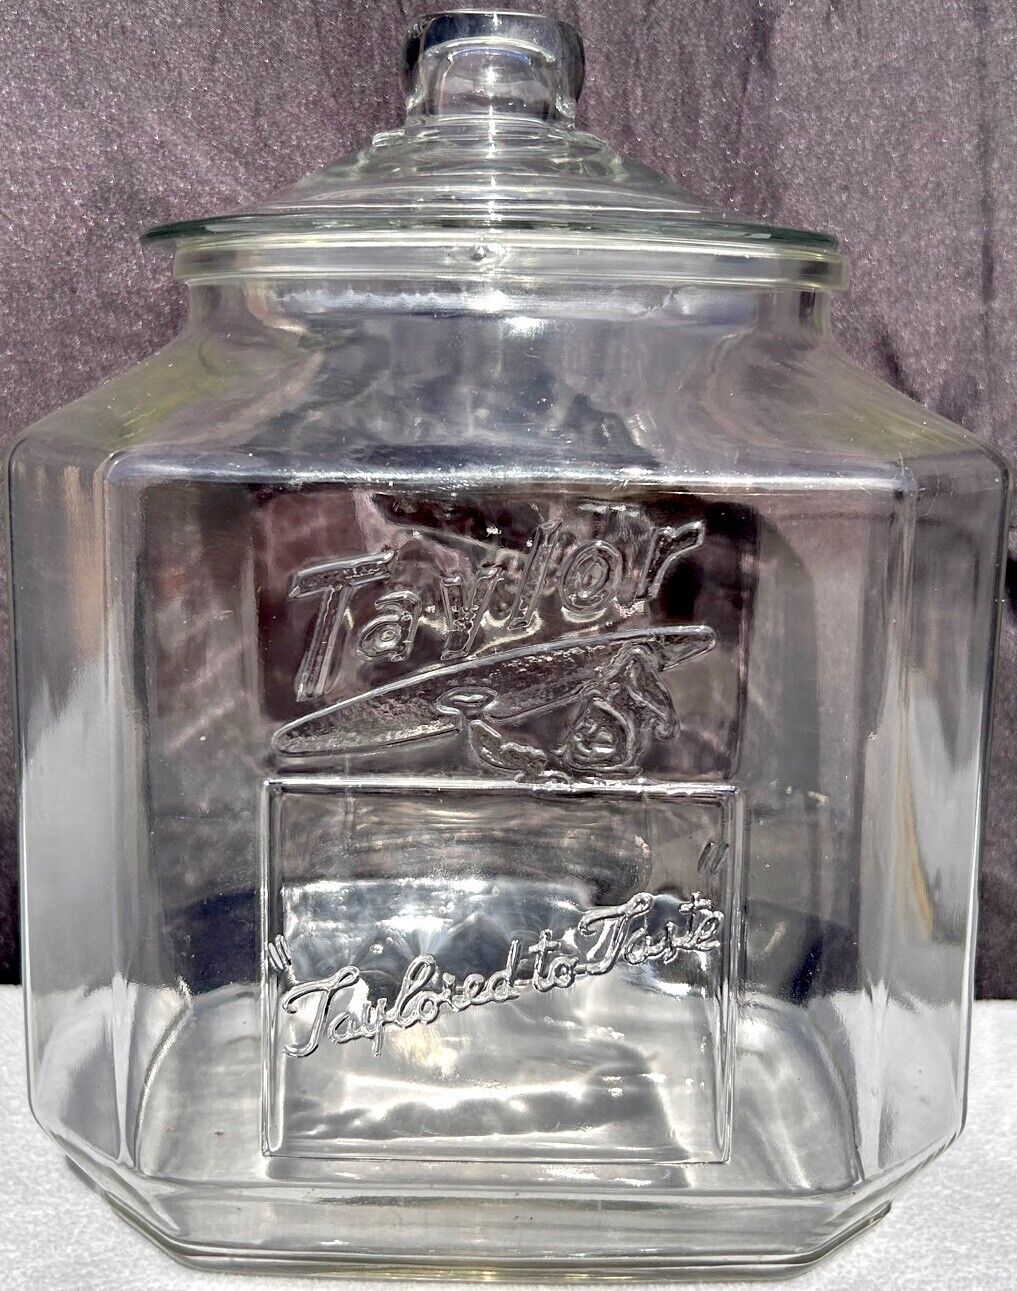 Circa 1940's Original Taylor Biscuit Co. Country Store Glass Jar - EXCELLENT